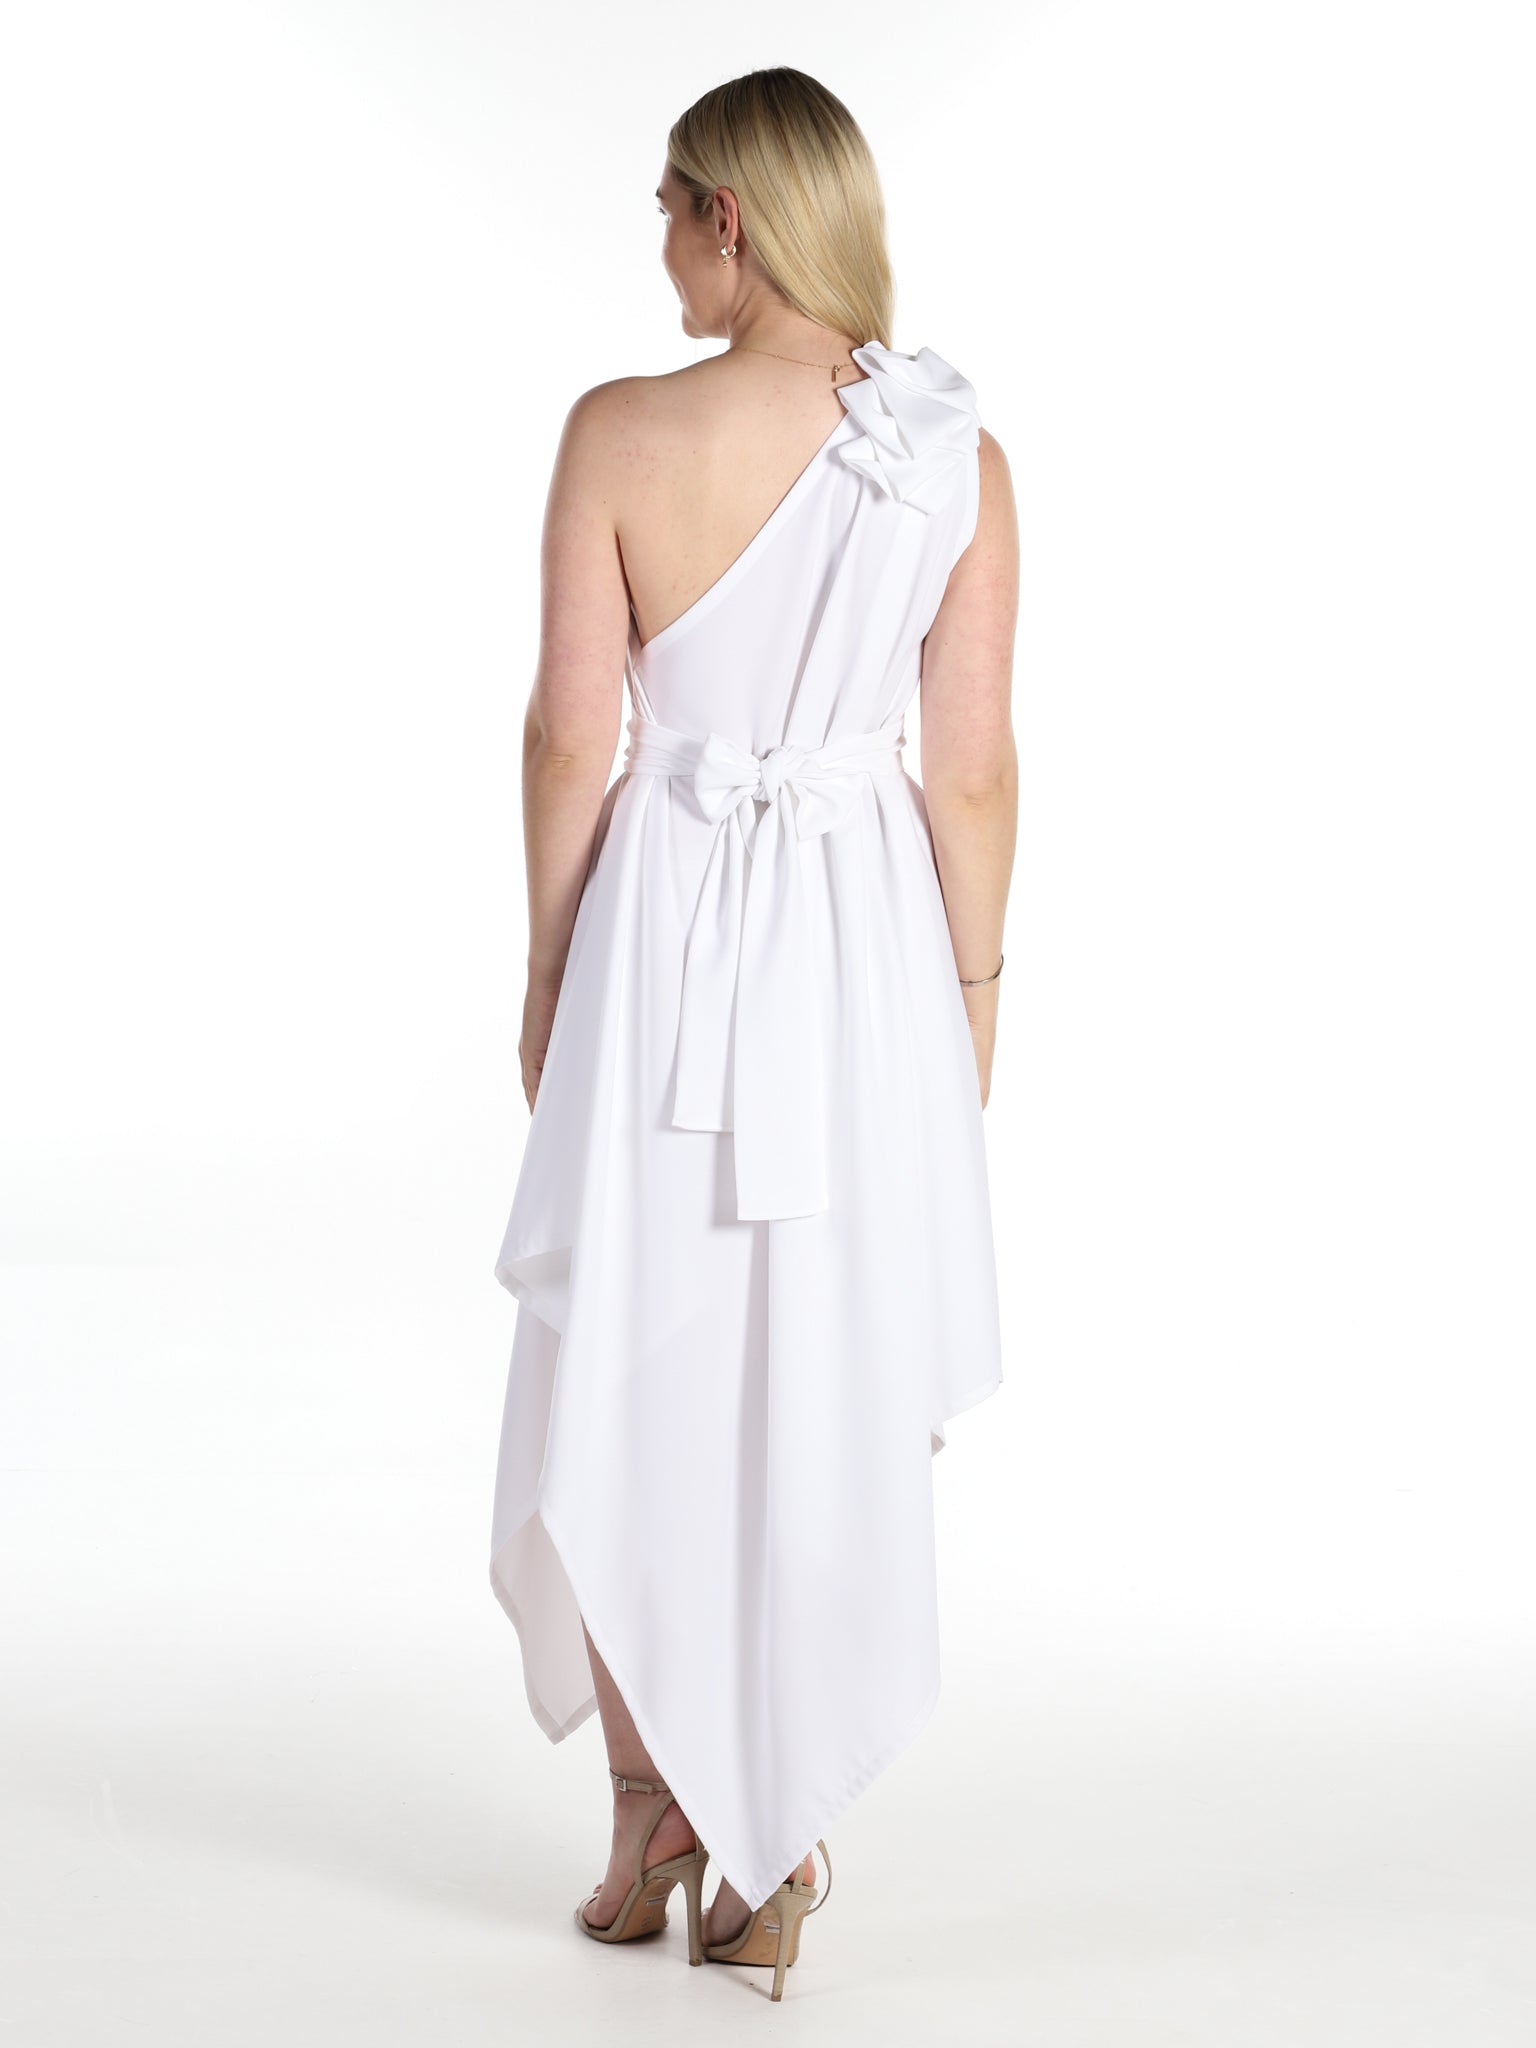 White Belle Dress with Ruffle